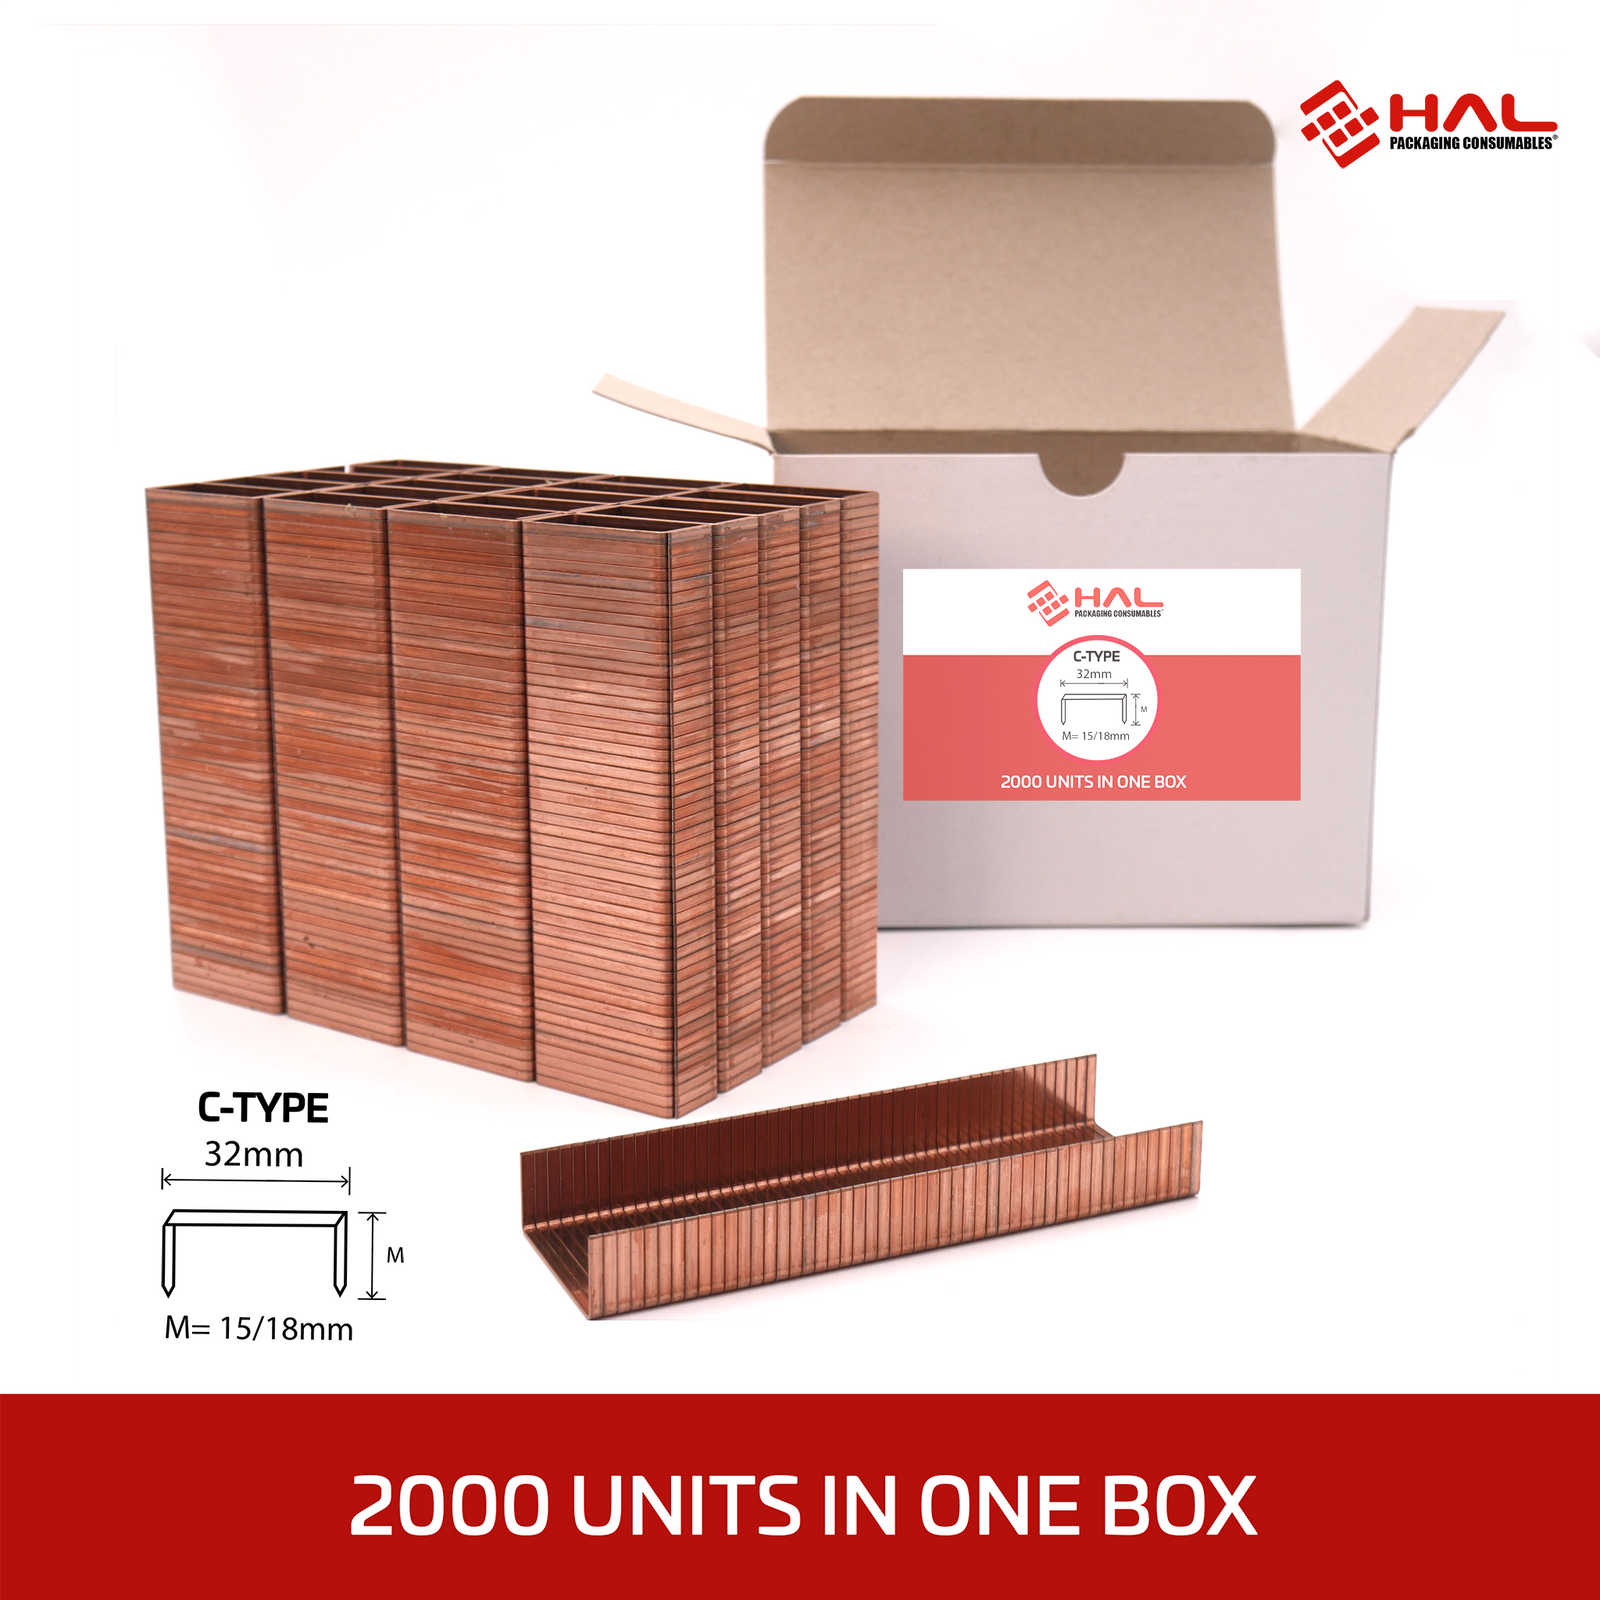 Bulk of 2000 industrial staples included in a box. Type C staples measure 32mm wide